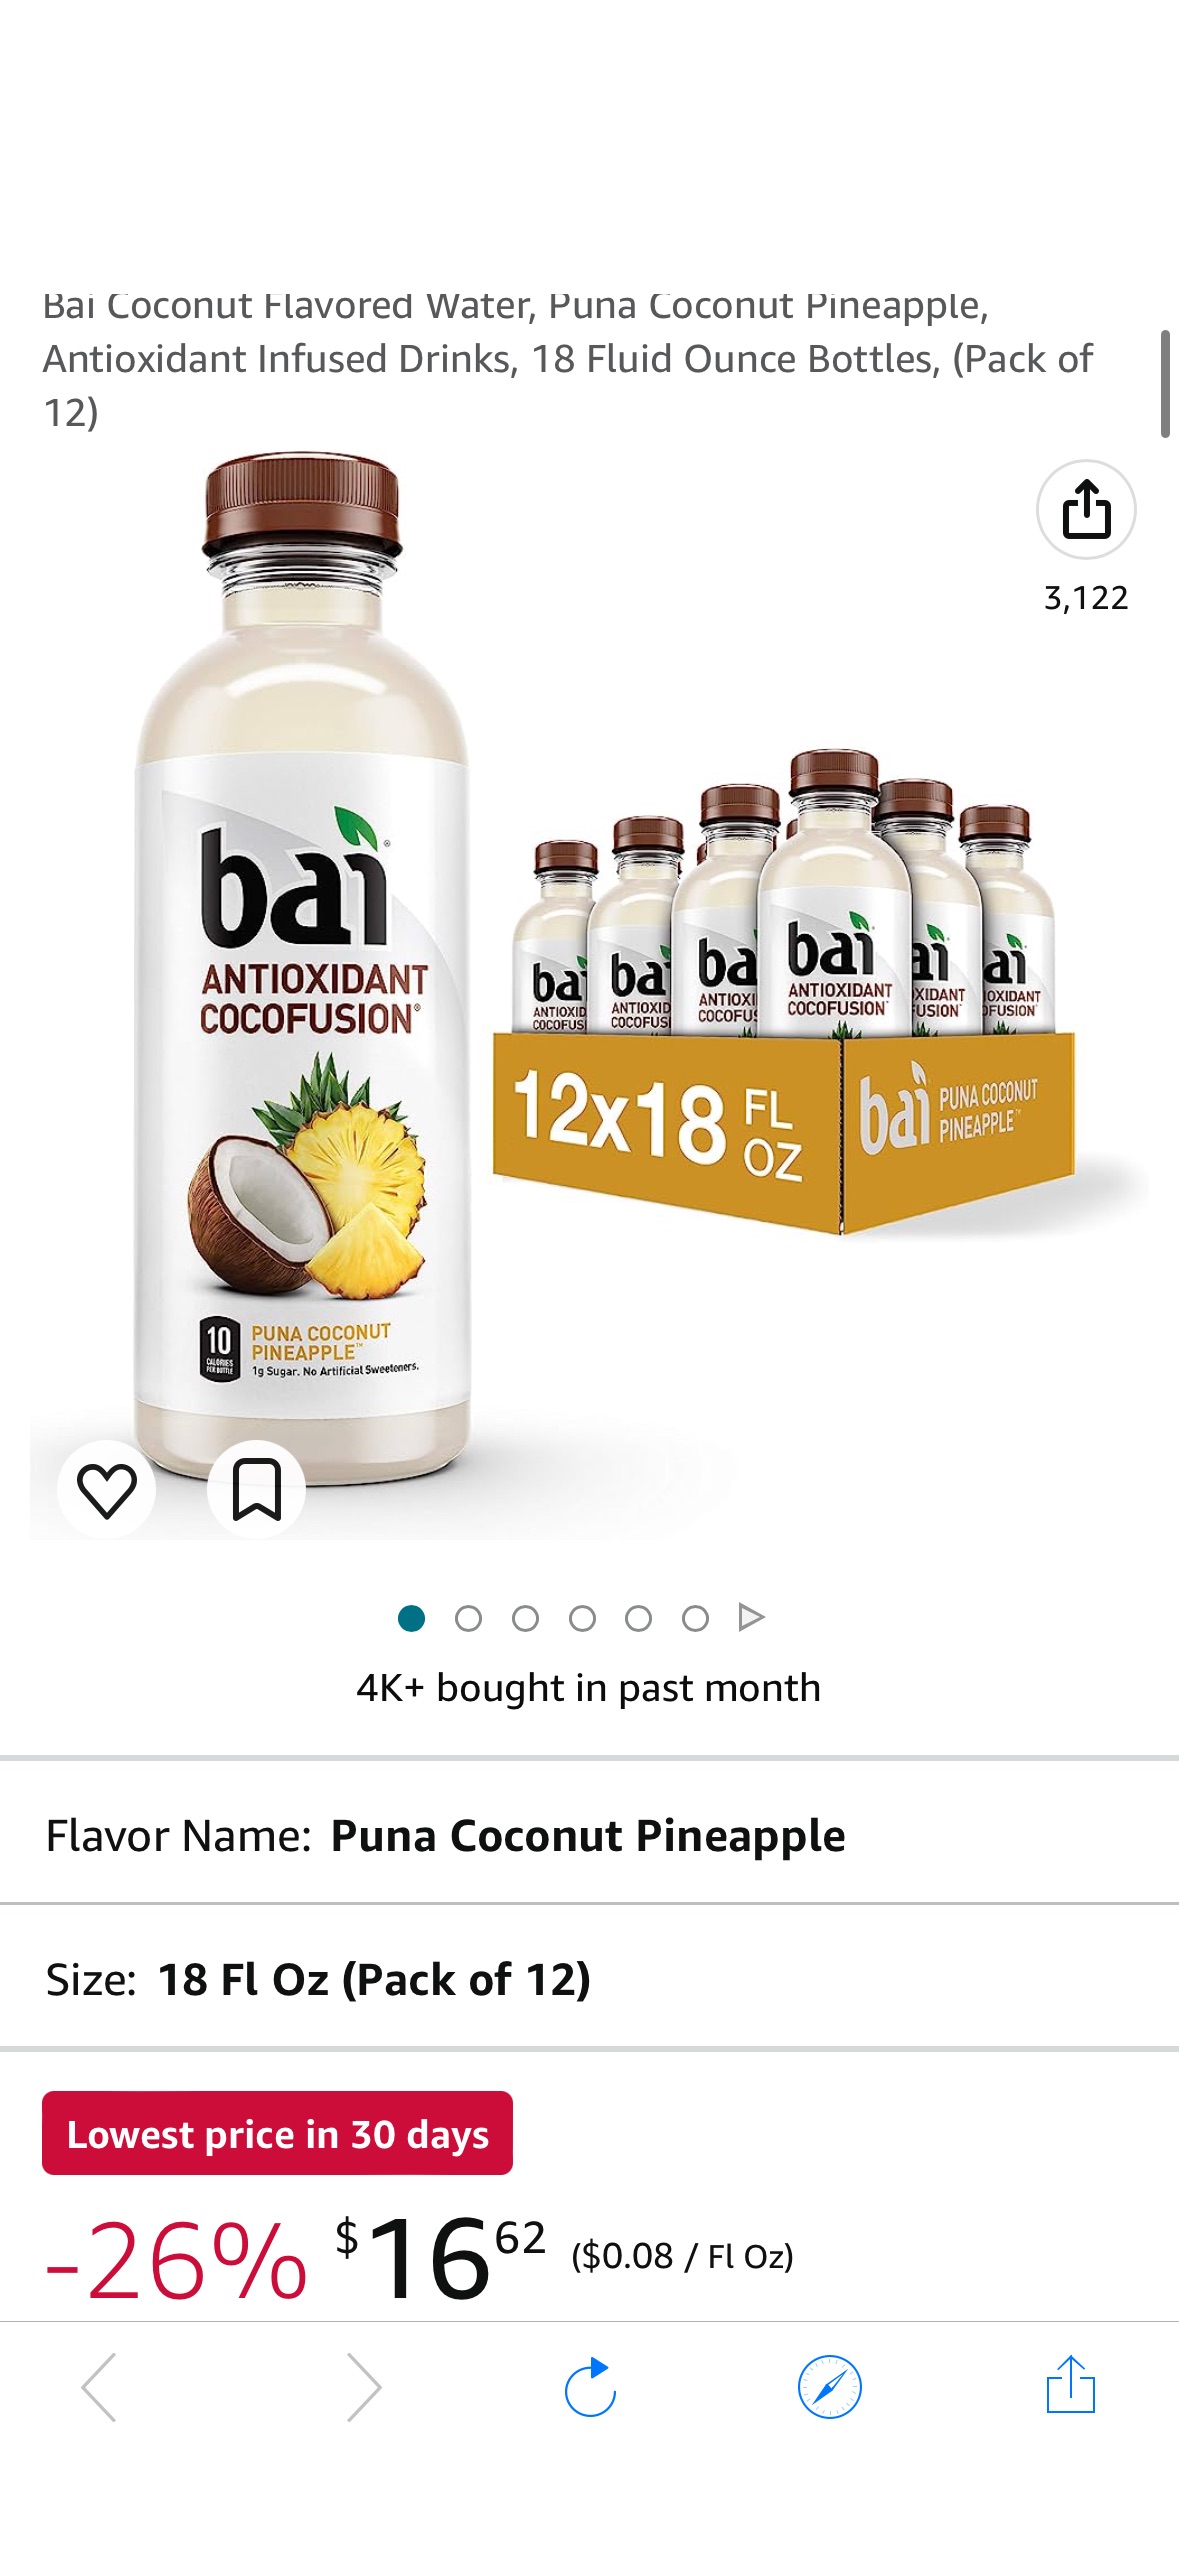 Amazon.com : Bai Coconut Flavored Water, Puna Coconut Pineapple, Antioxidant Infused Drinks, 18 Fluid Ounce Bottles, (Pack of 12) : Grocery & Gourmet Food